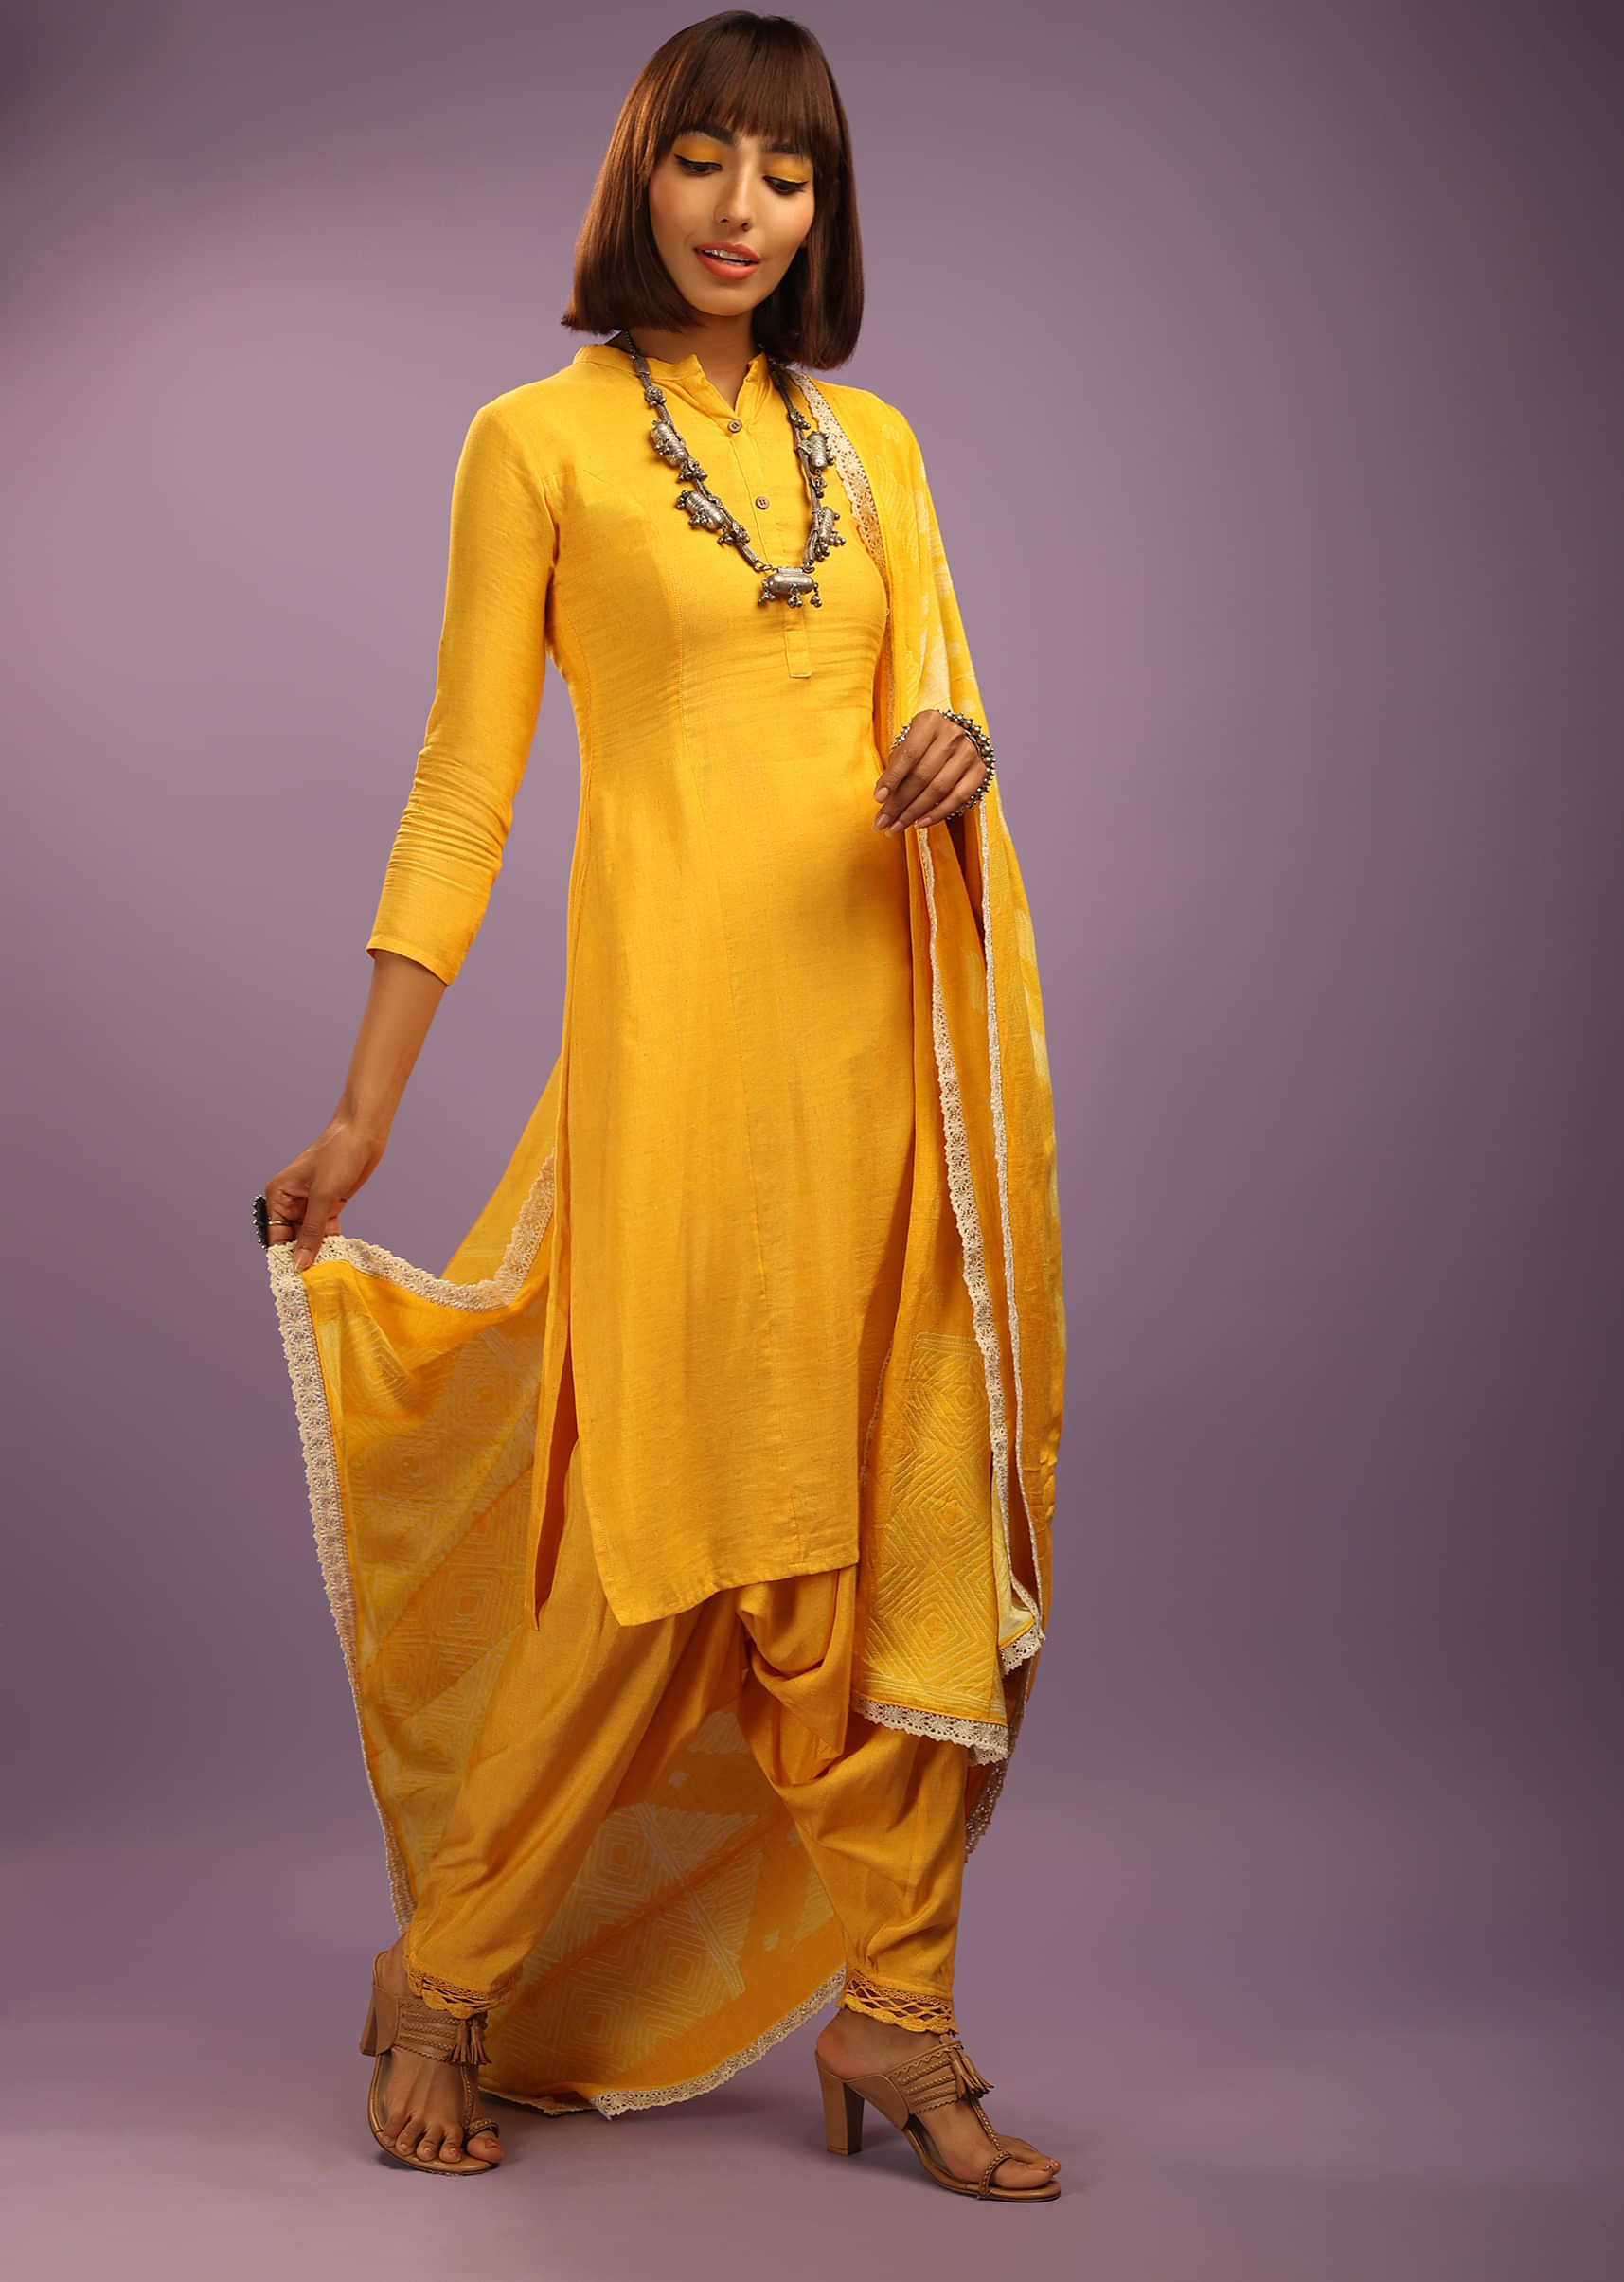 Sun Yellow Cowl Dhoti Suit In Khadi Cotton With Shaded Tie Dye Printed Dupatta  